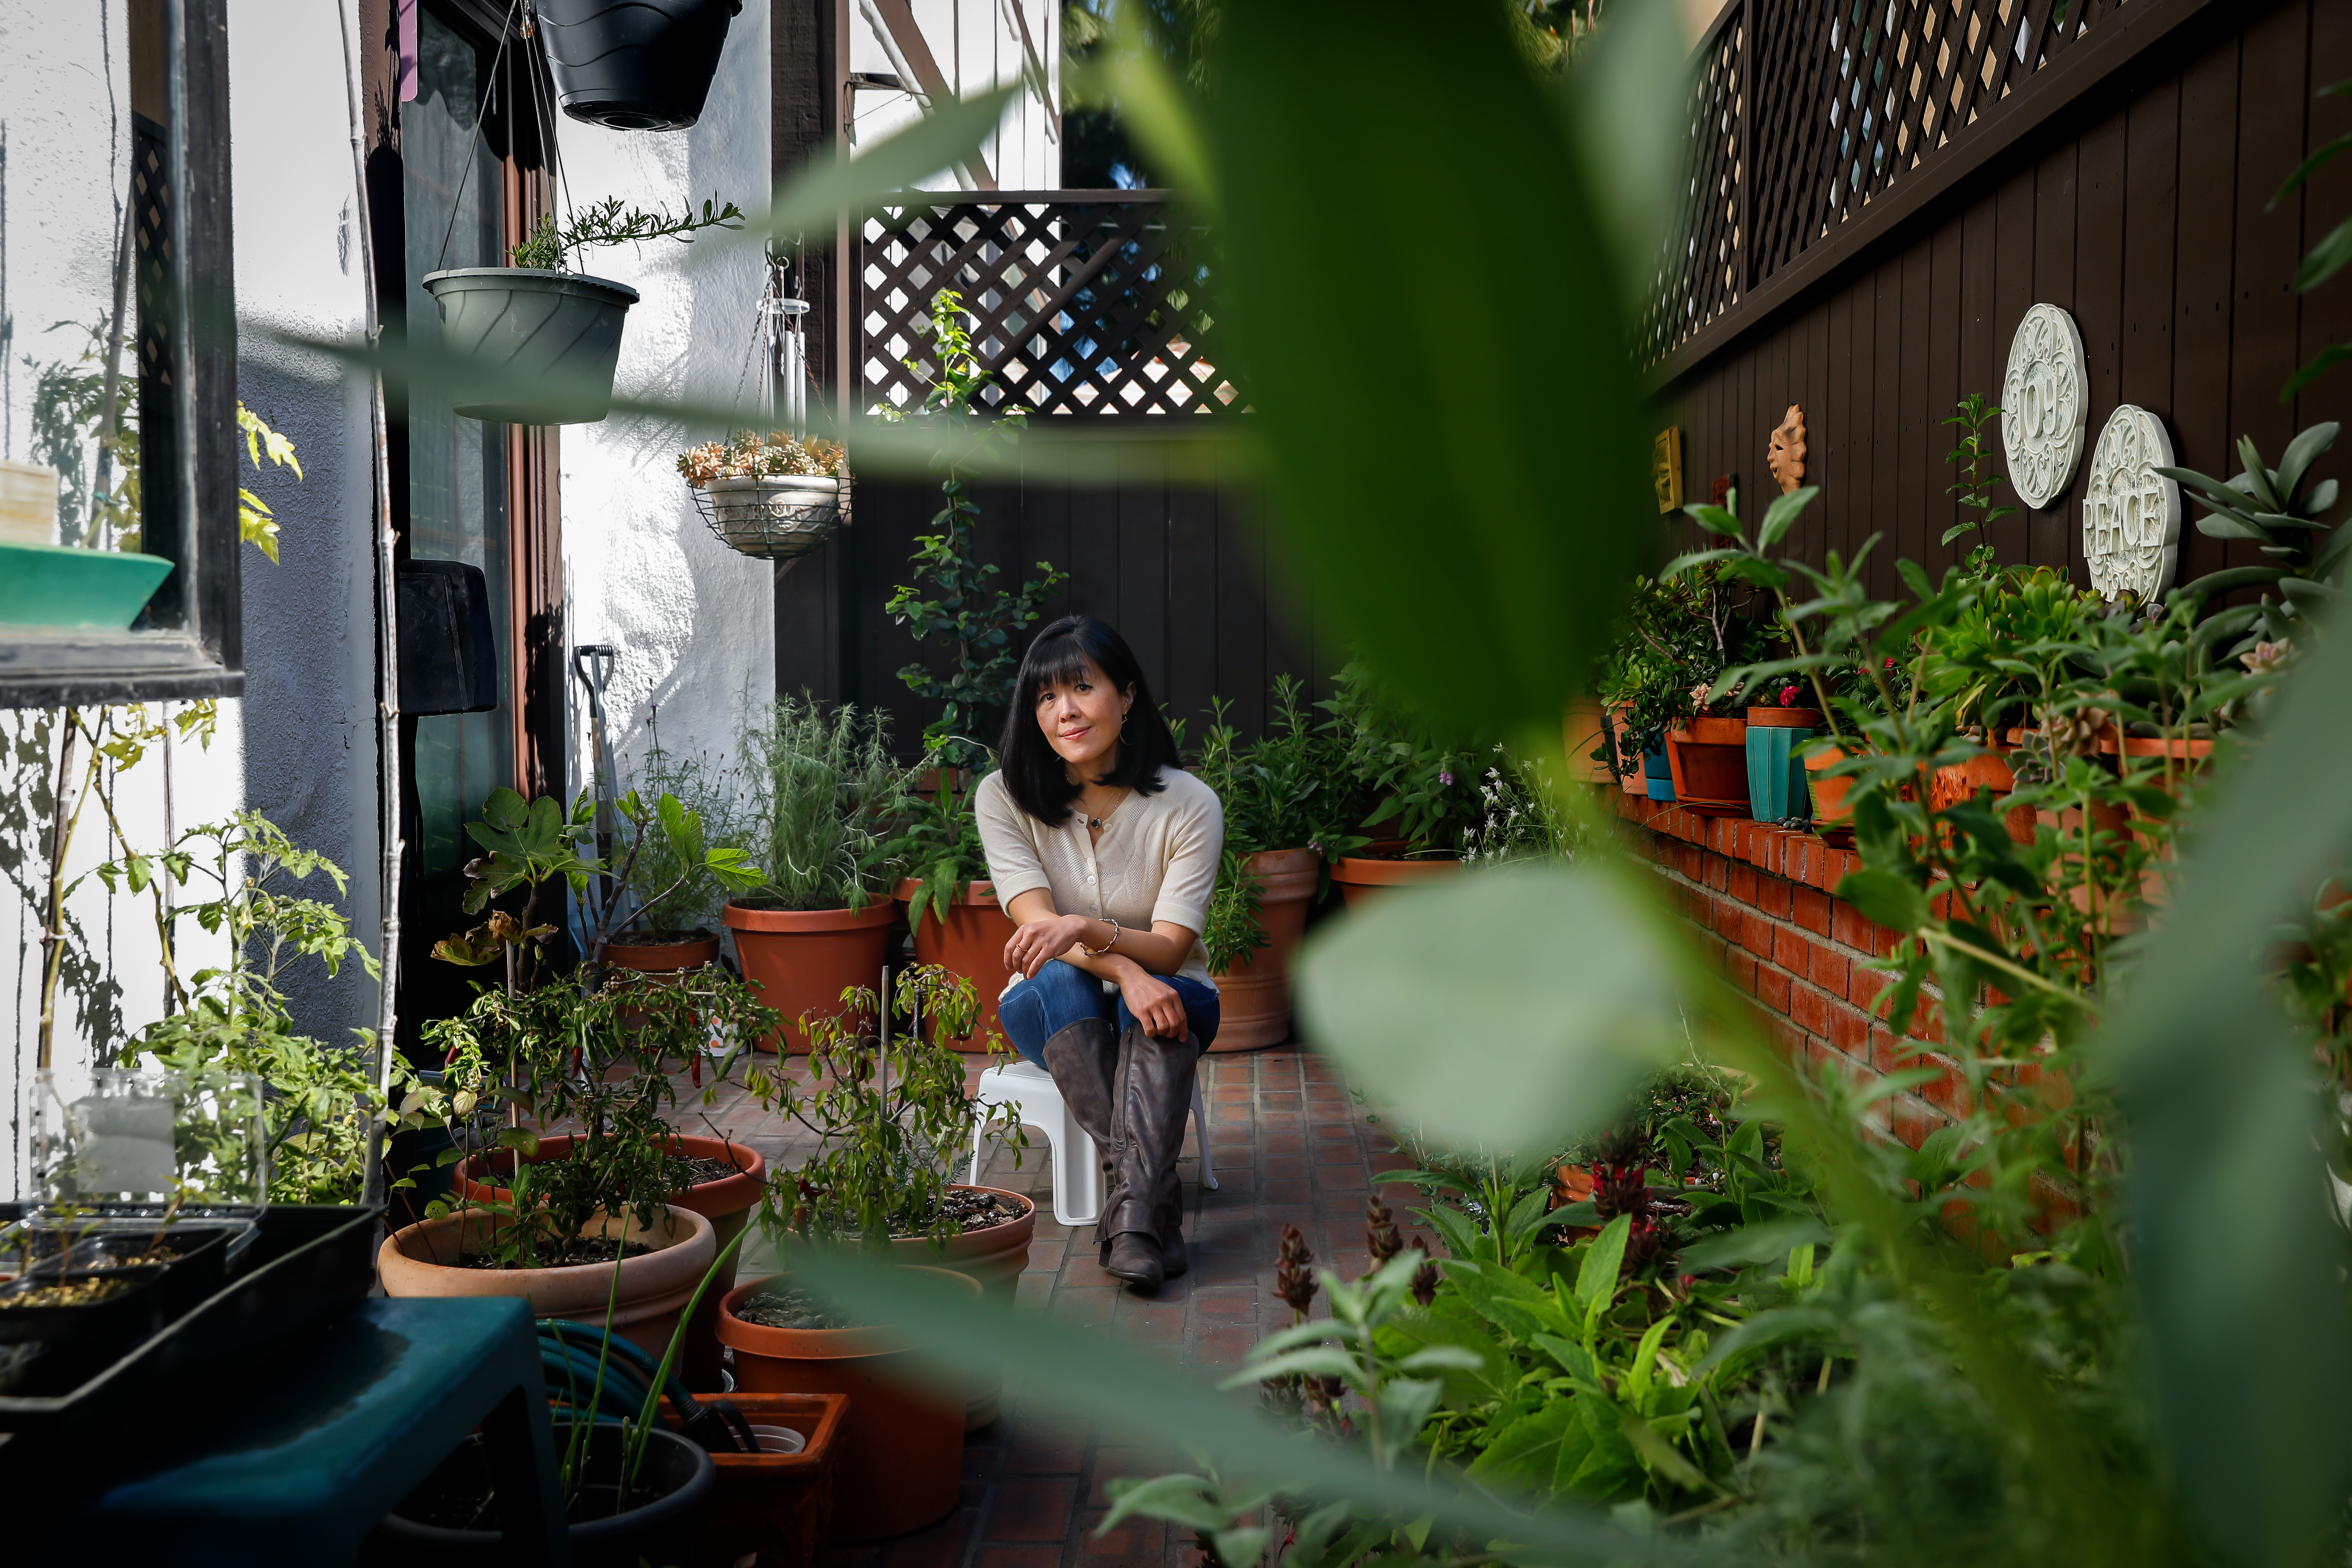 SANTA MONICA-CA-MARCH 7, 2023: Barbara Chung is photographed on her patio surrounded by her plants at home in Santa Monica on March 7, 2023. (Christina House / Los Angeles Times)